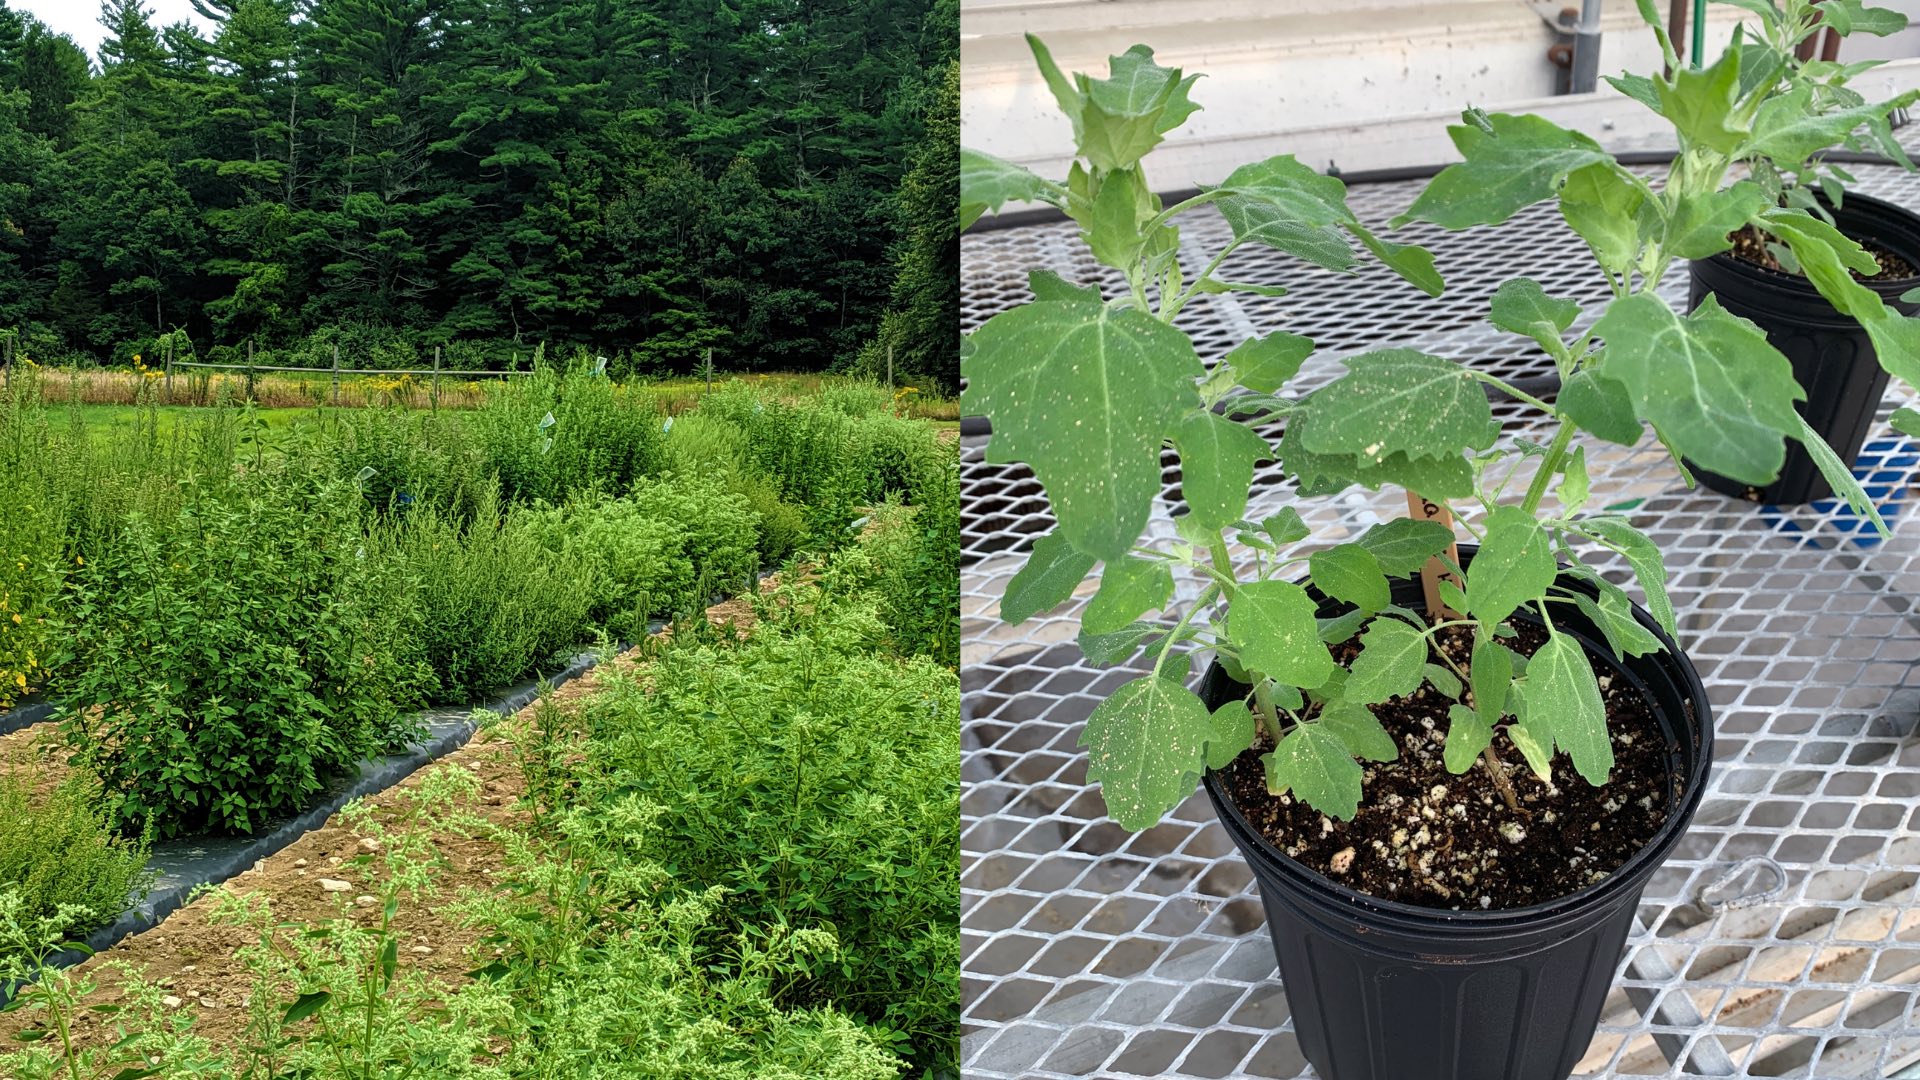 A photo of cultivated NH weeds (left) and a potted pitseed goosefoot plant (right) Inspired Horticultural Report